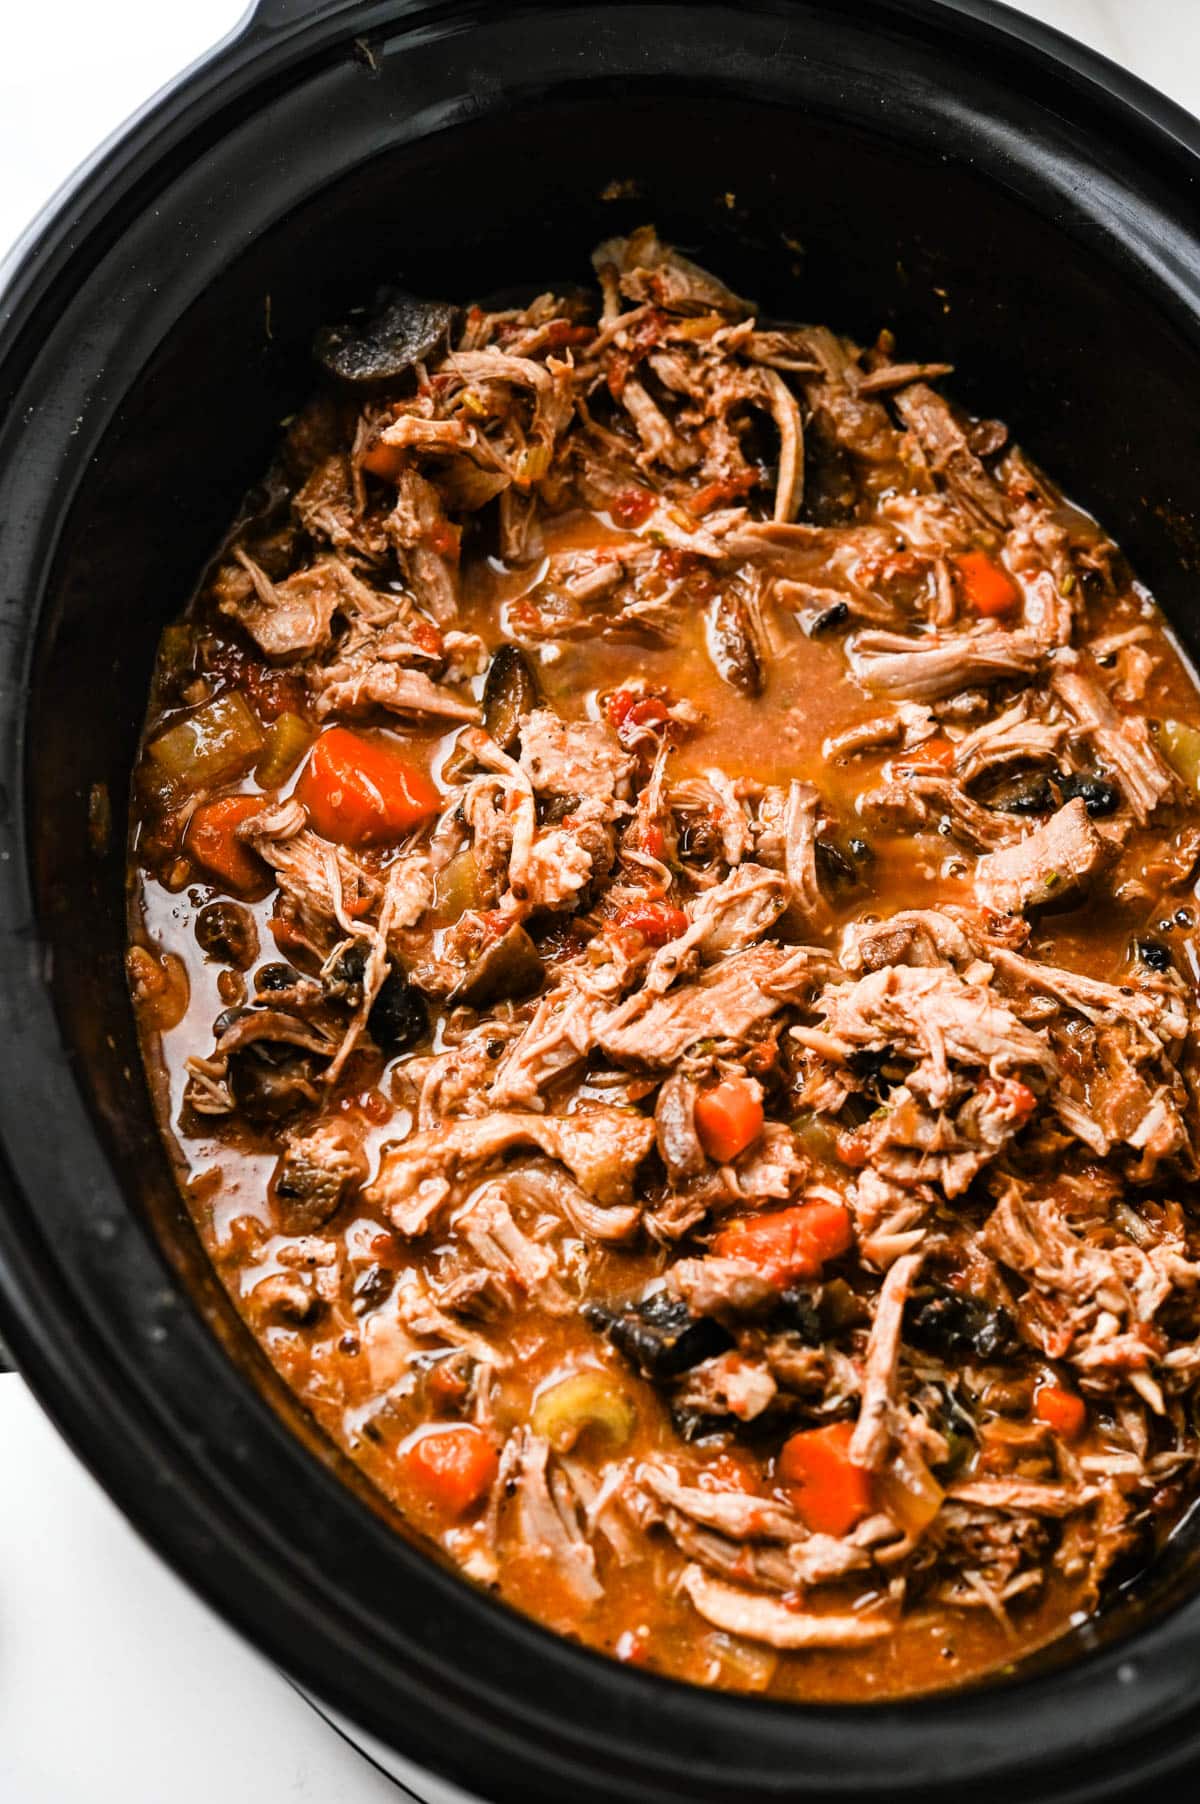 a Slow cooker filled with pork ragu.